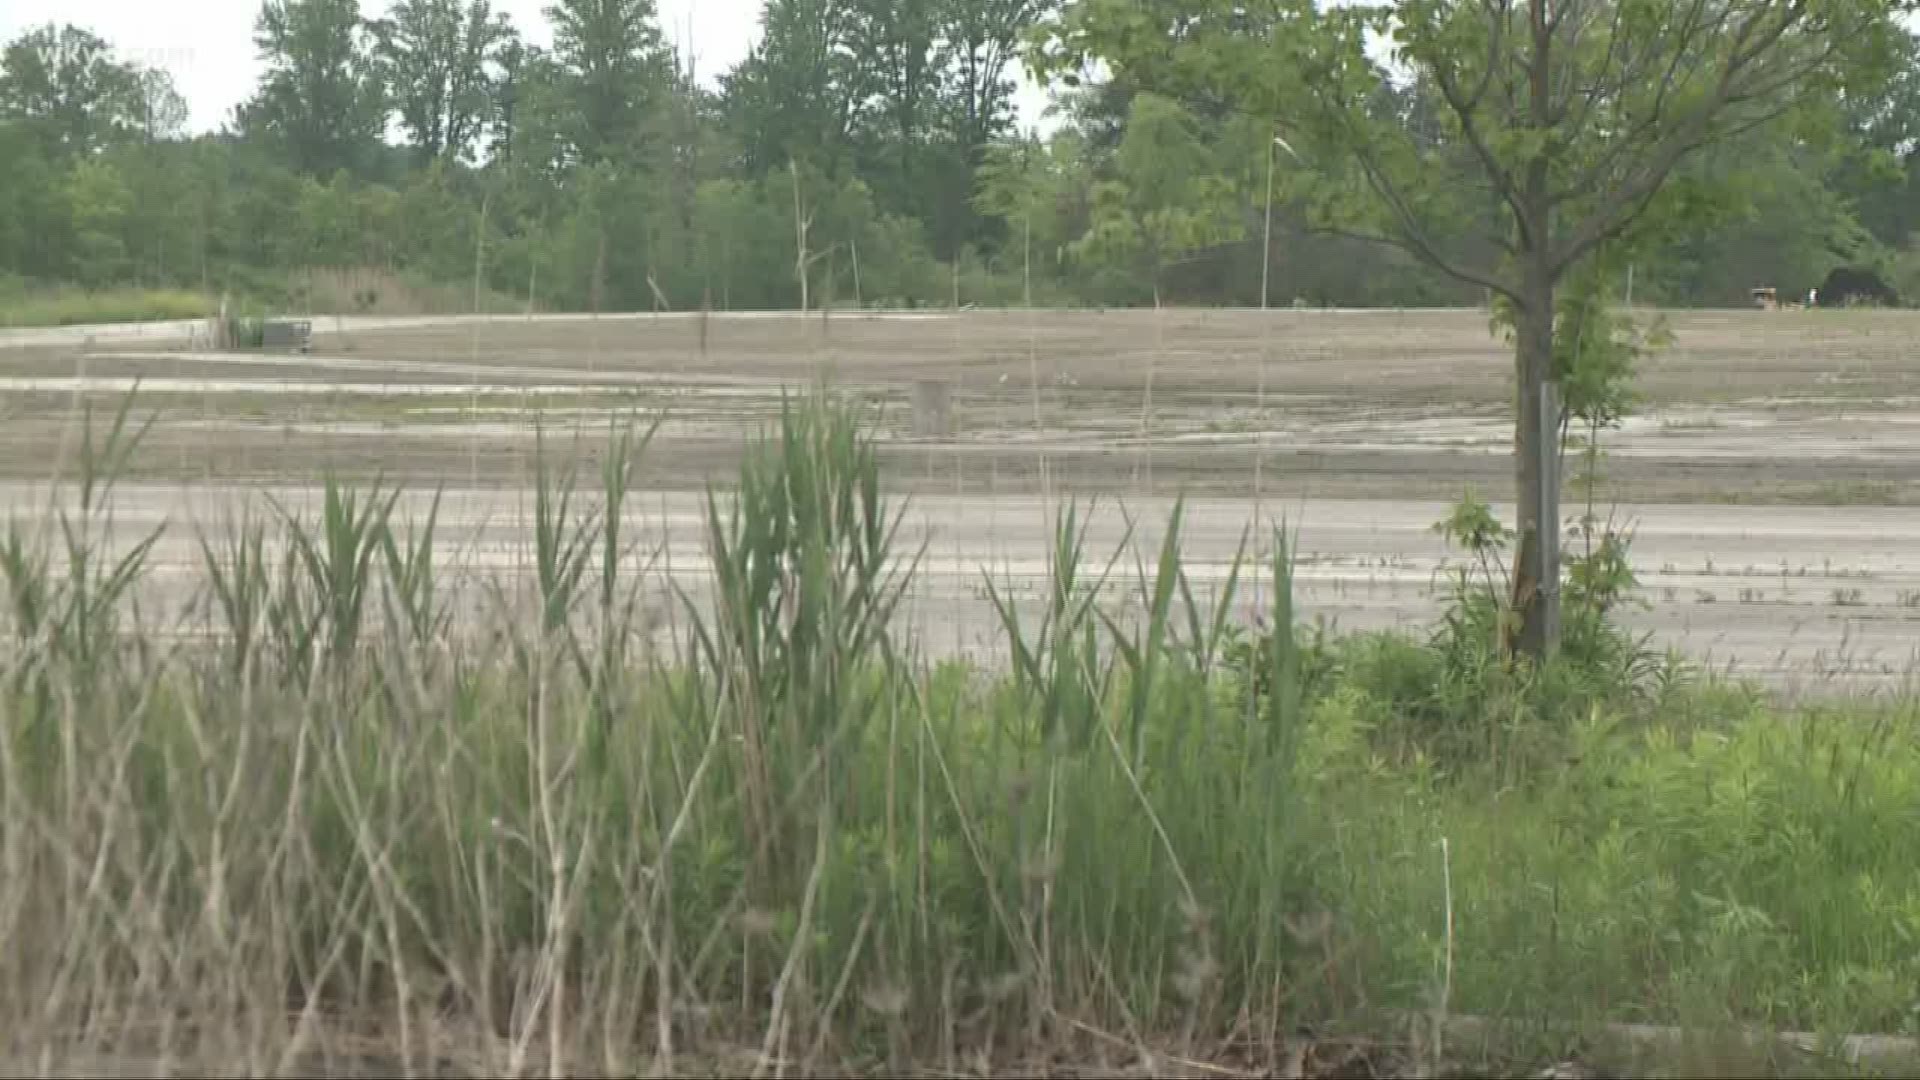 Meijer store no longer coming to Geauga lake property